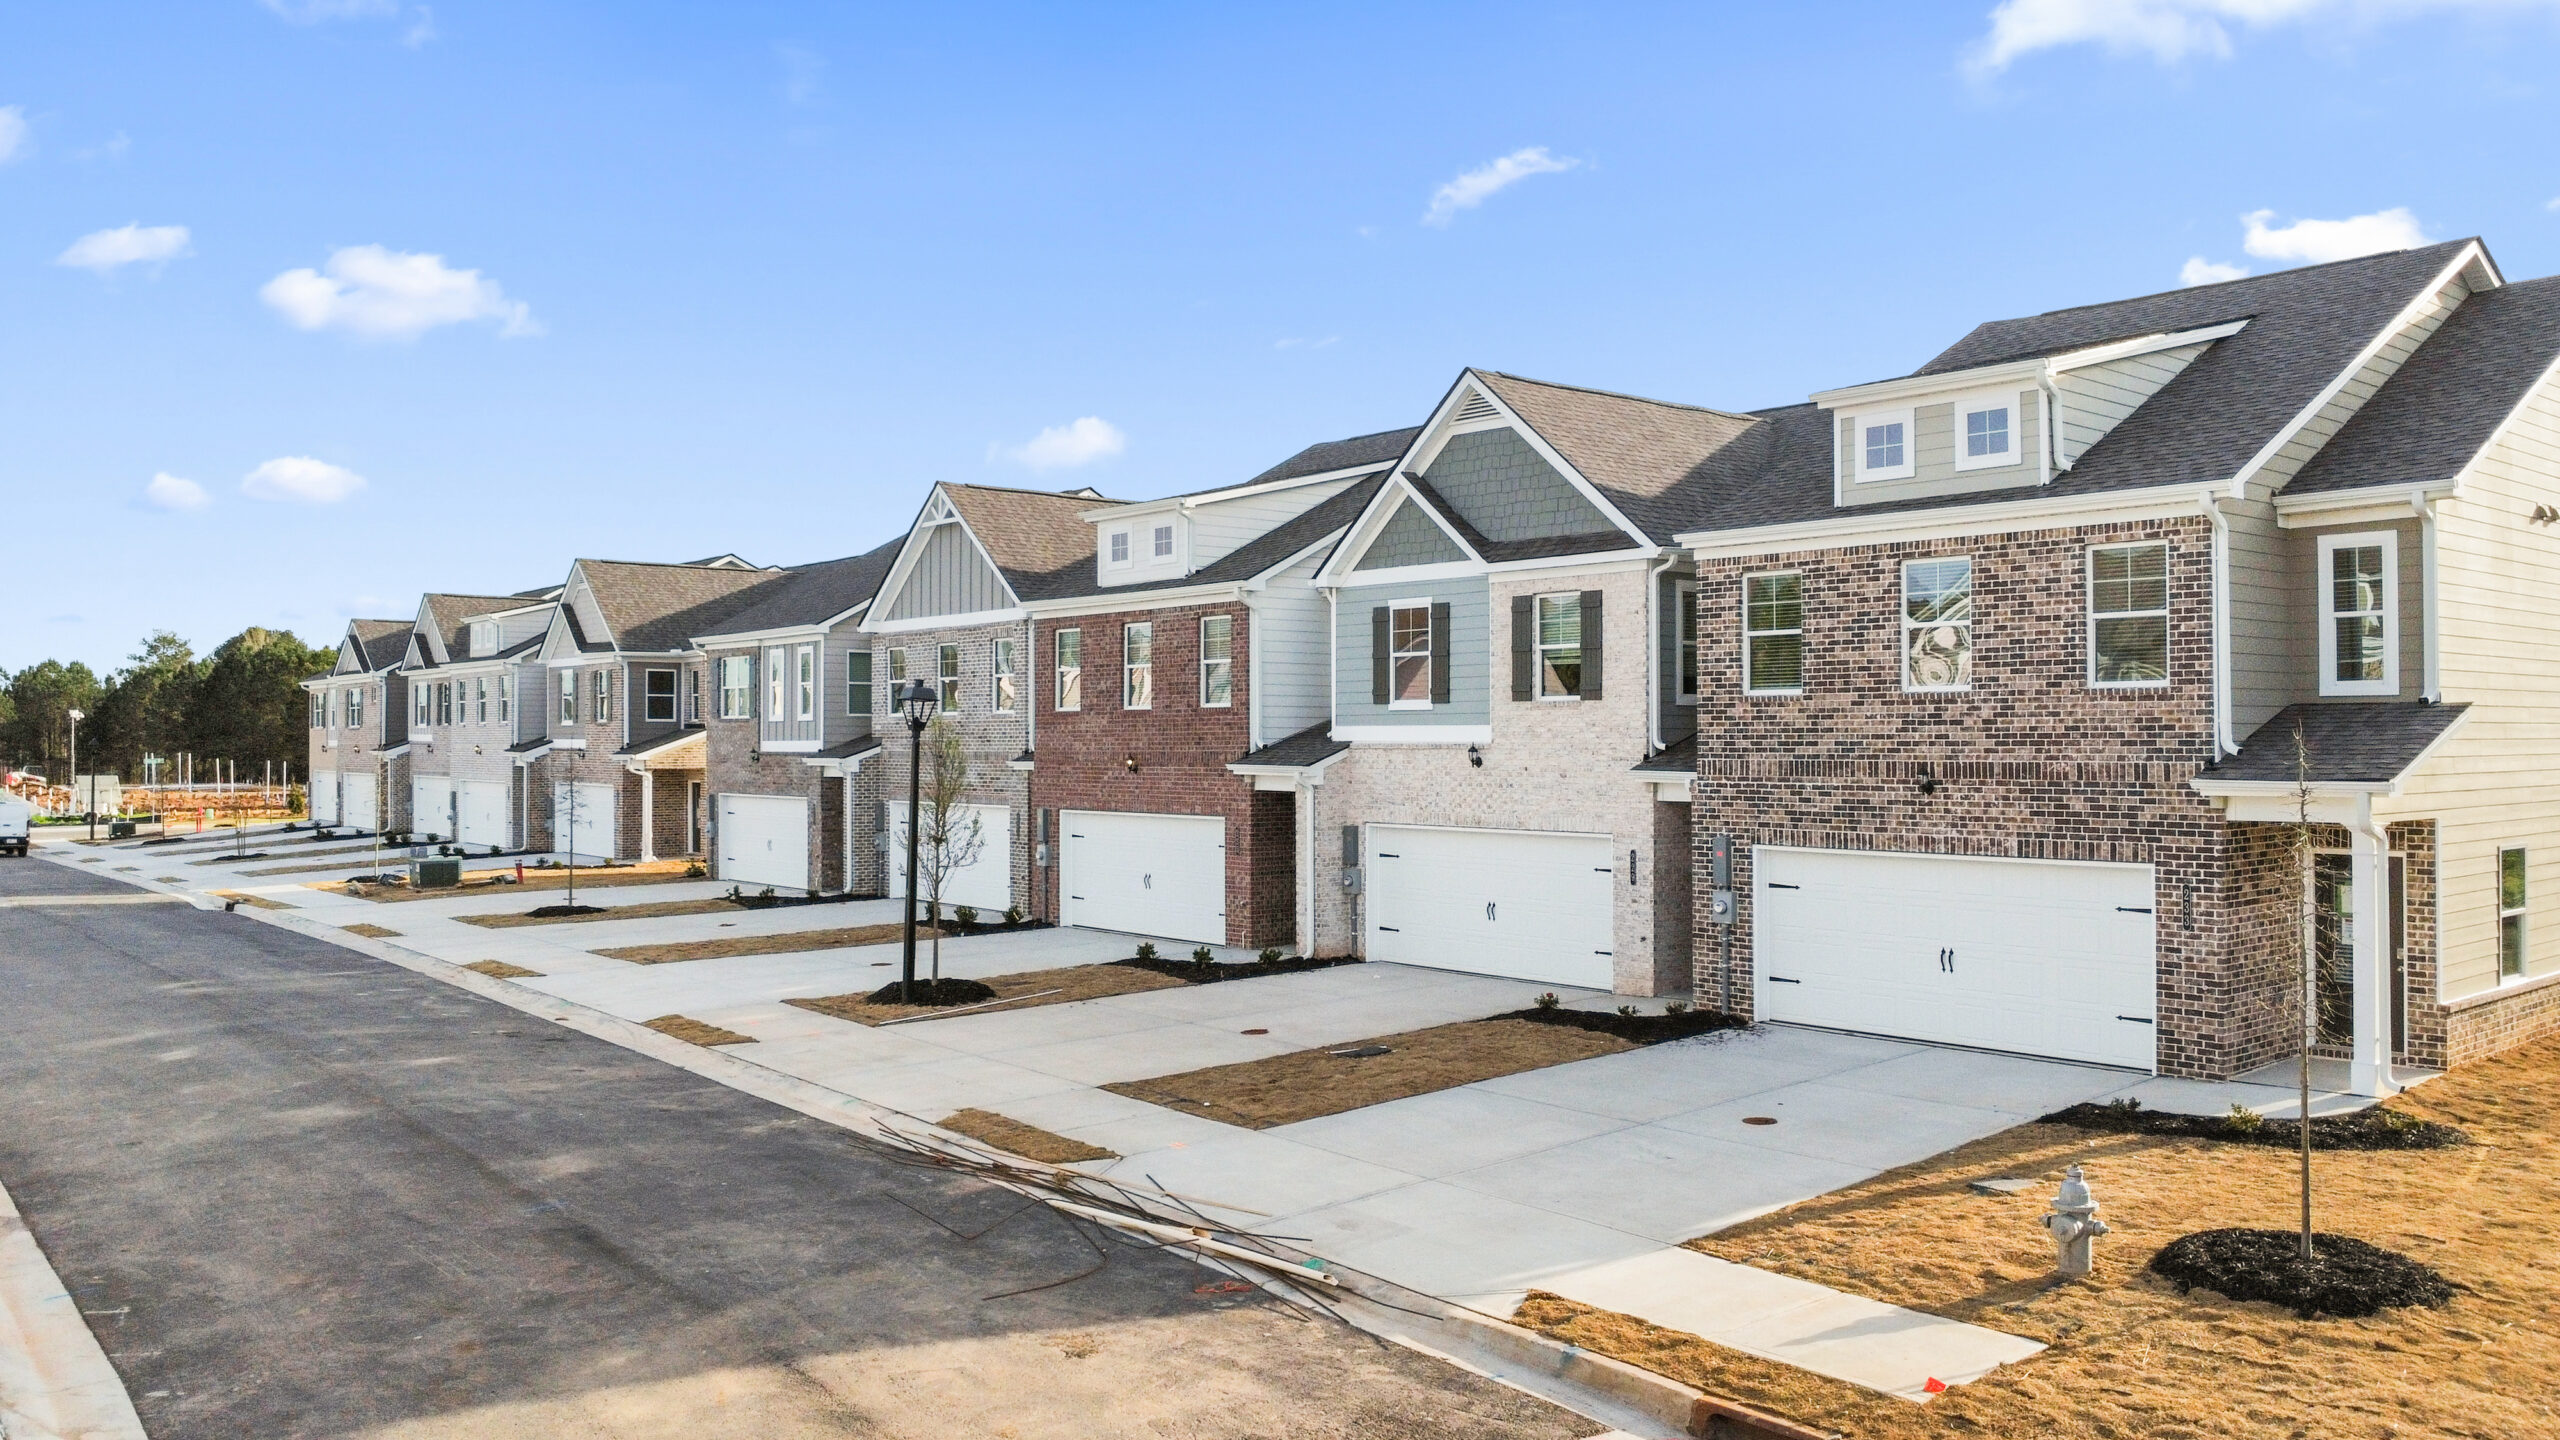 Find a brand-new townhome at The Enclave at Whitewater Creek